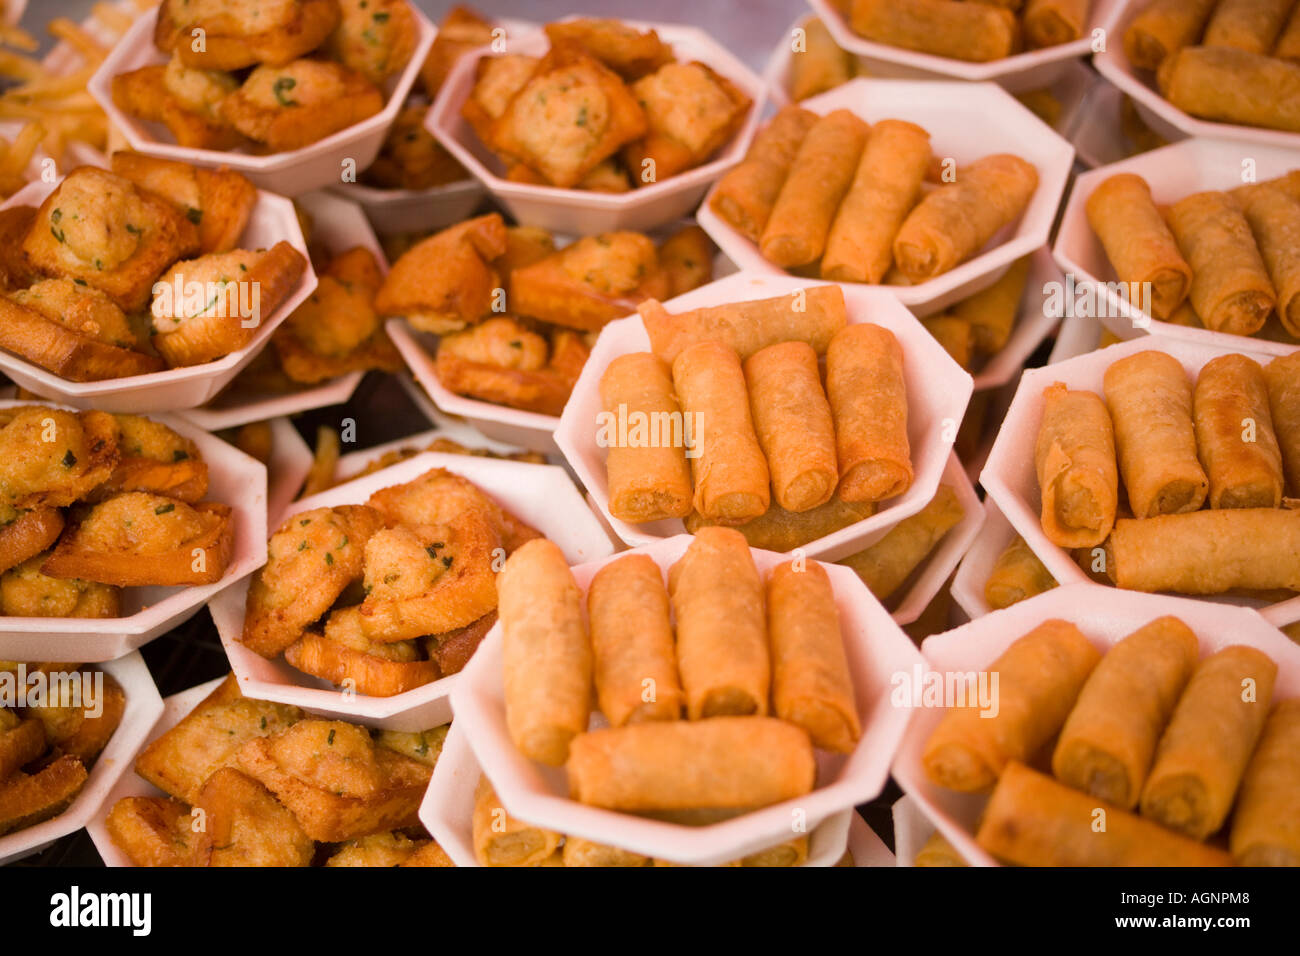 Dishes with spring rolls and Thai food offered at Suan Chatuchak Weekend Market Bangkok Thailand Stock Photo